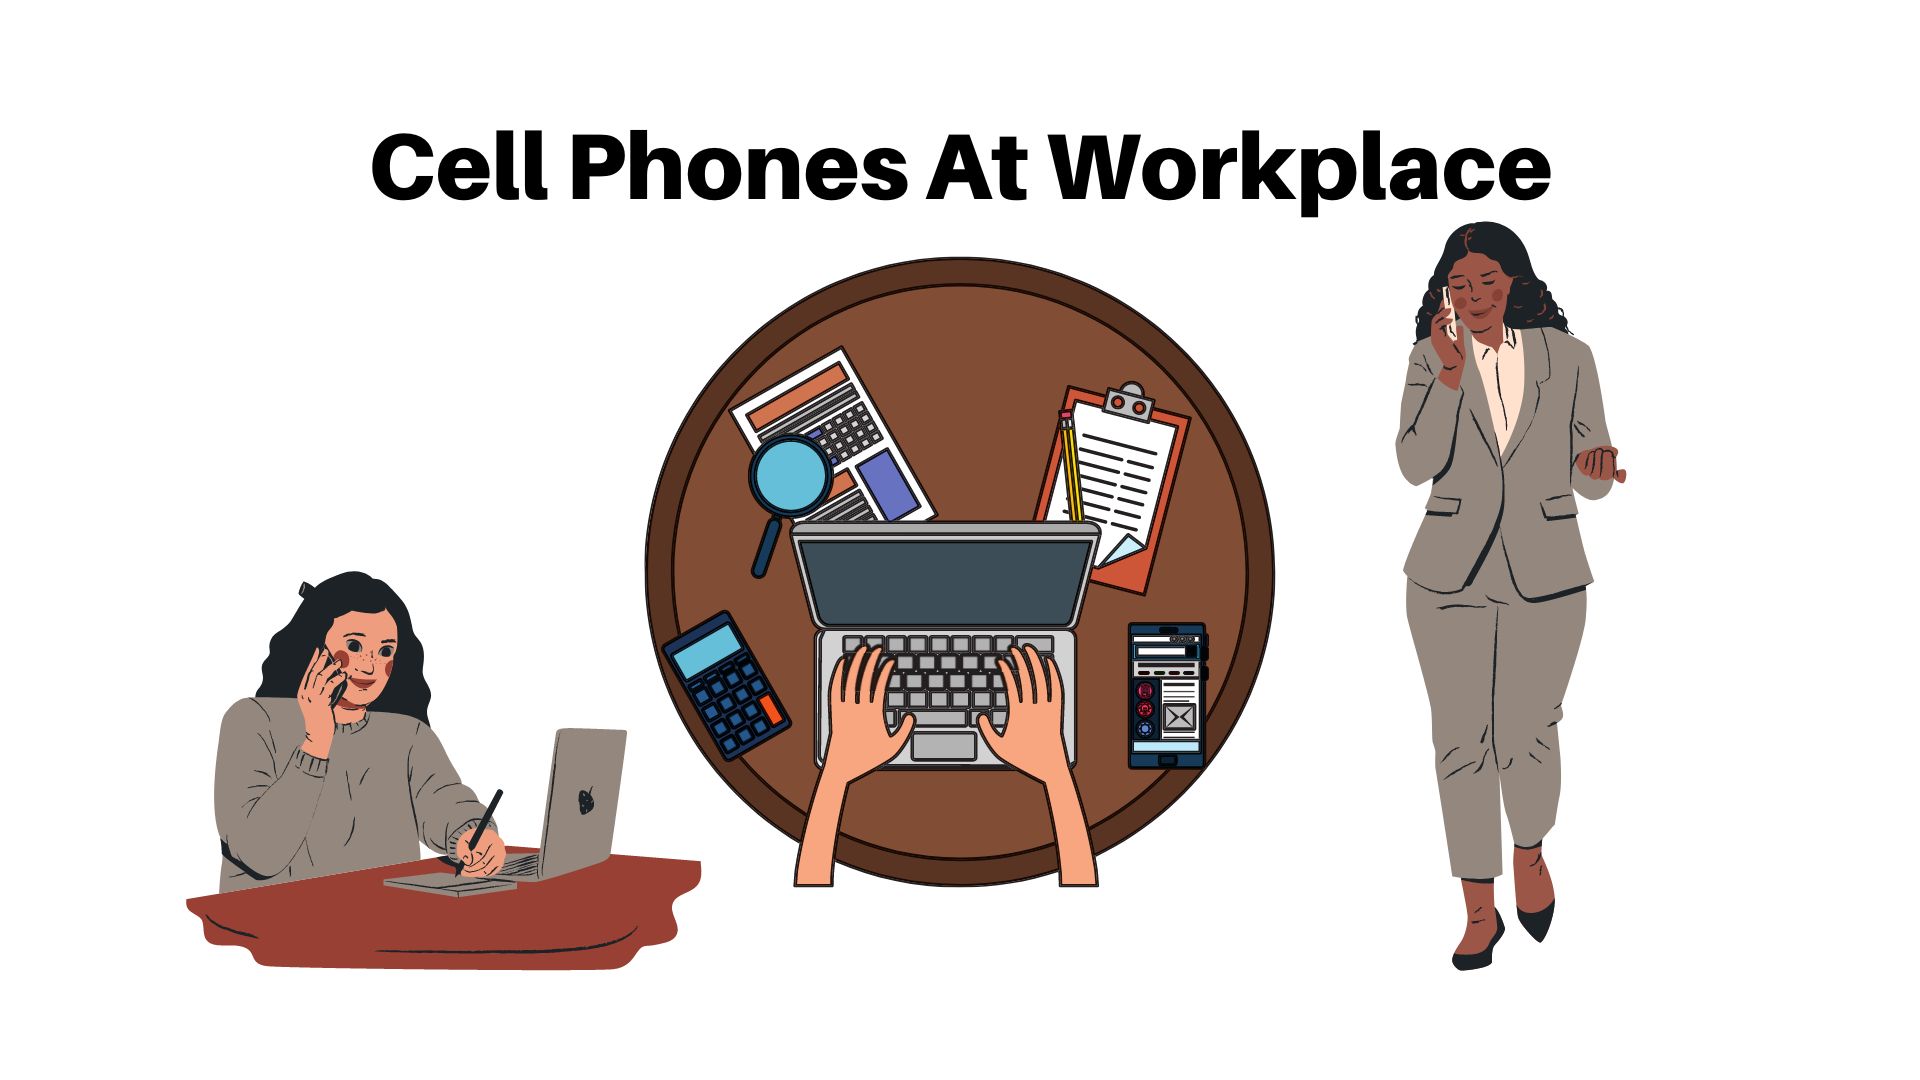 30+ Cell Phones At Workplace Statistics And Facts 2022